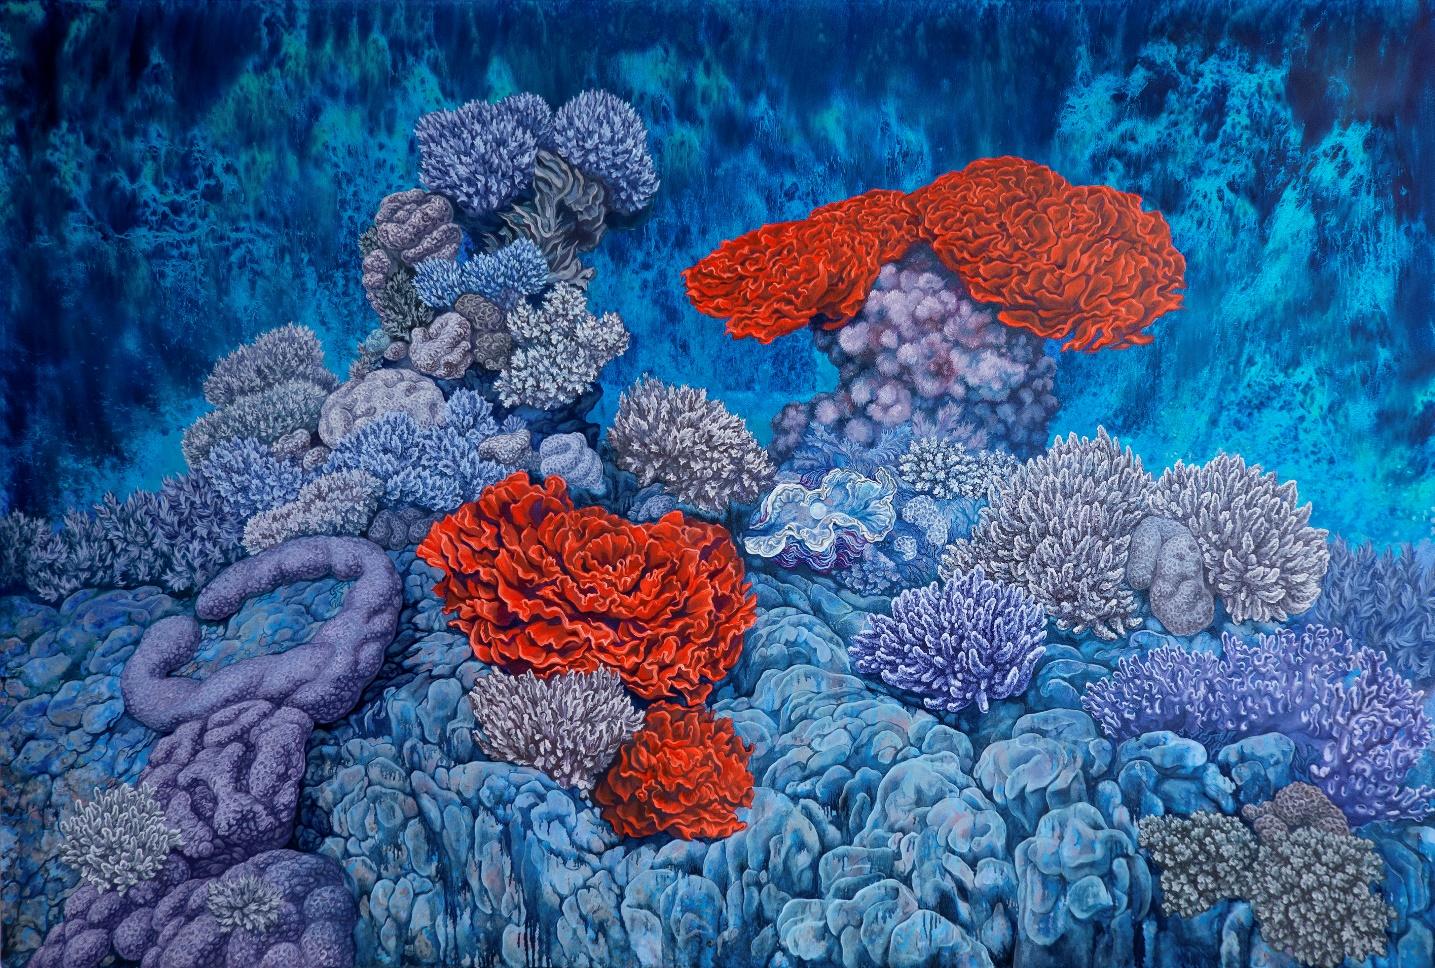 A painting of coral reef

Description automatically generated